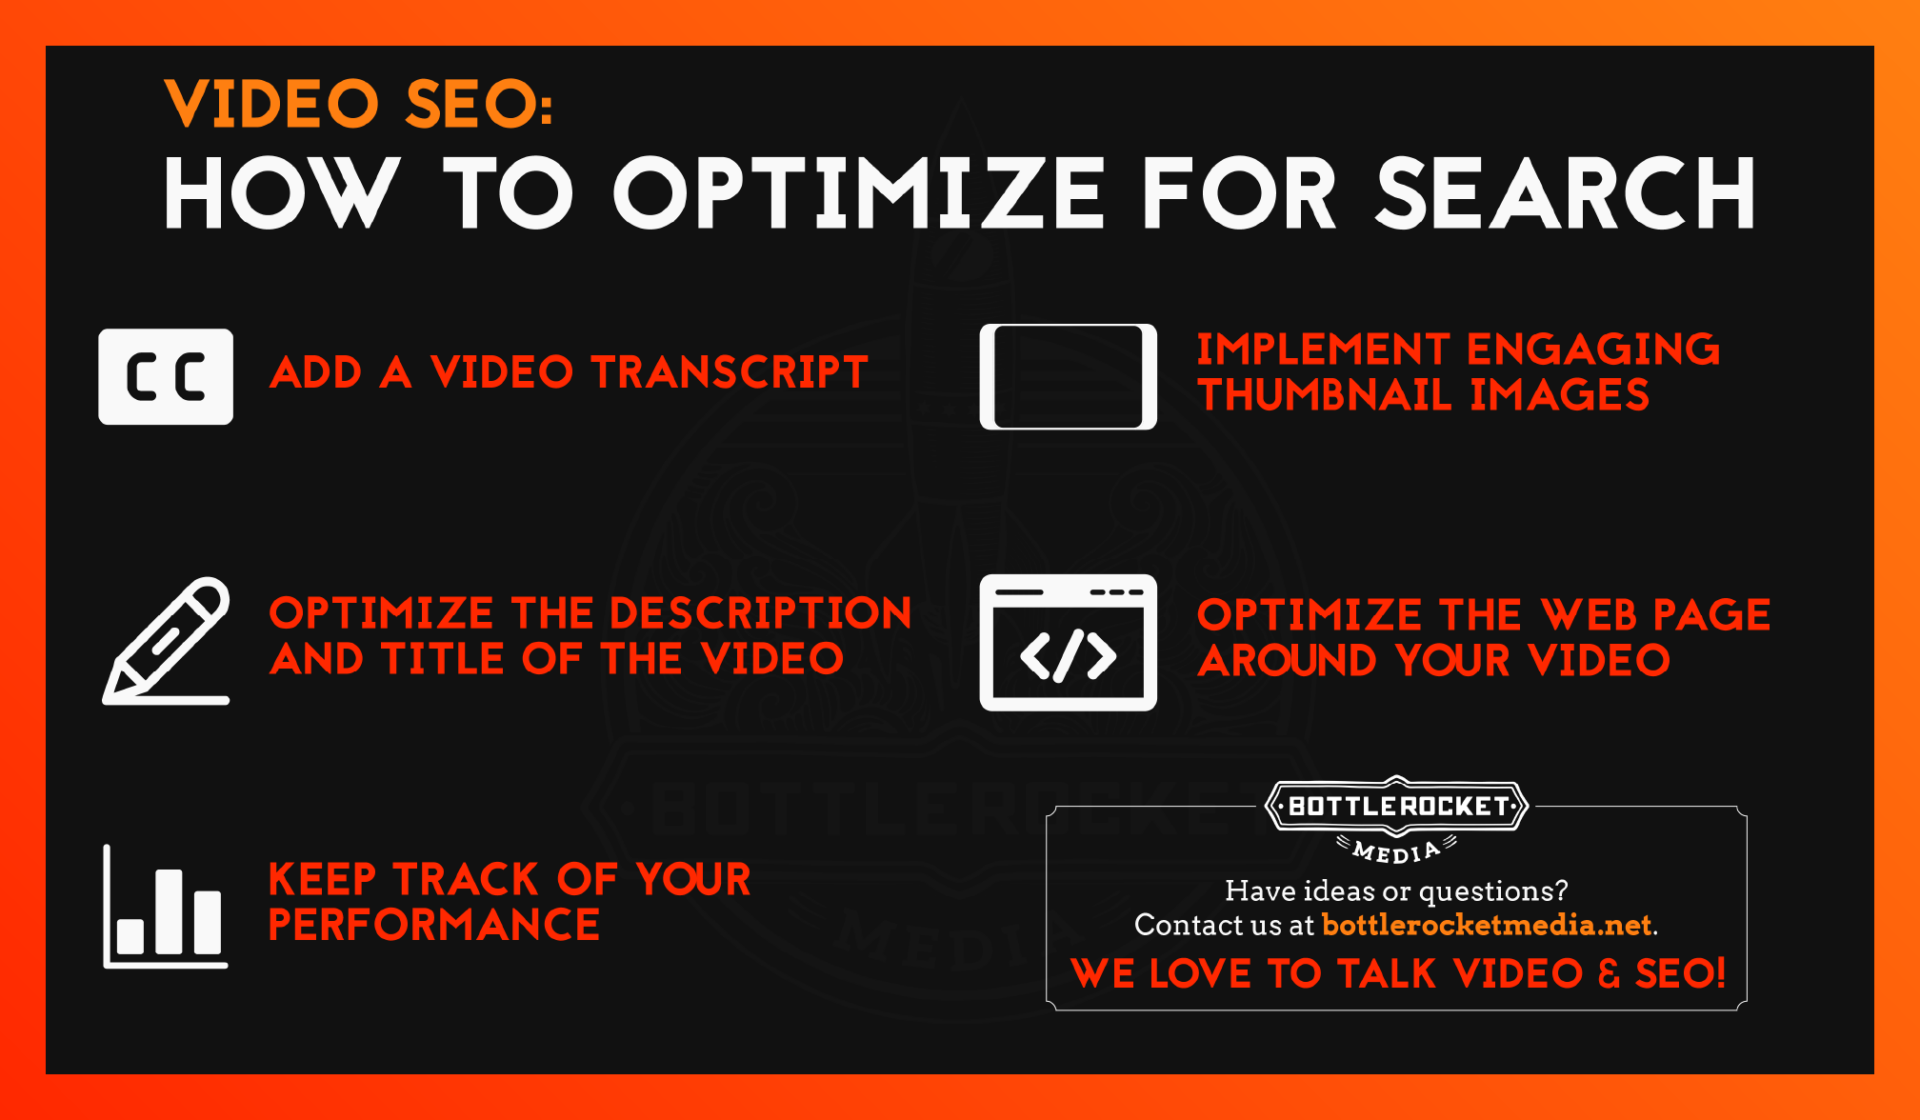 How to optimize for search